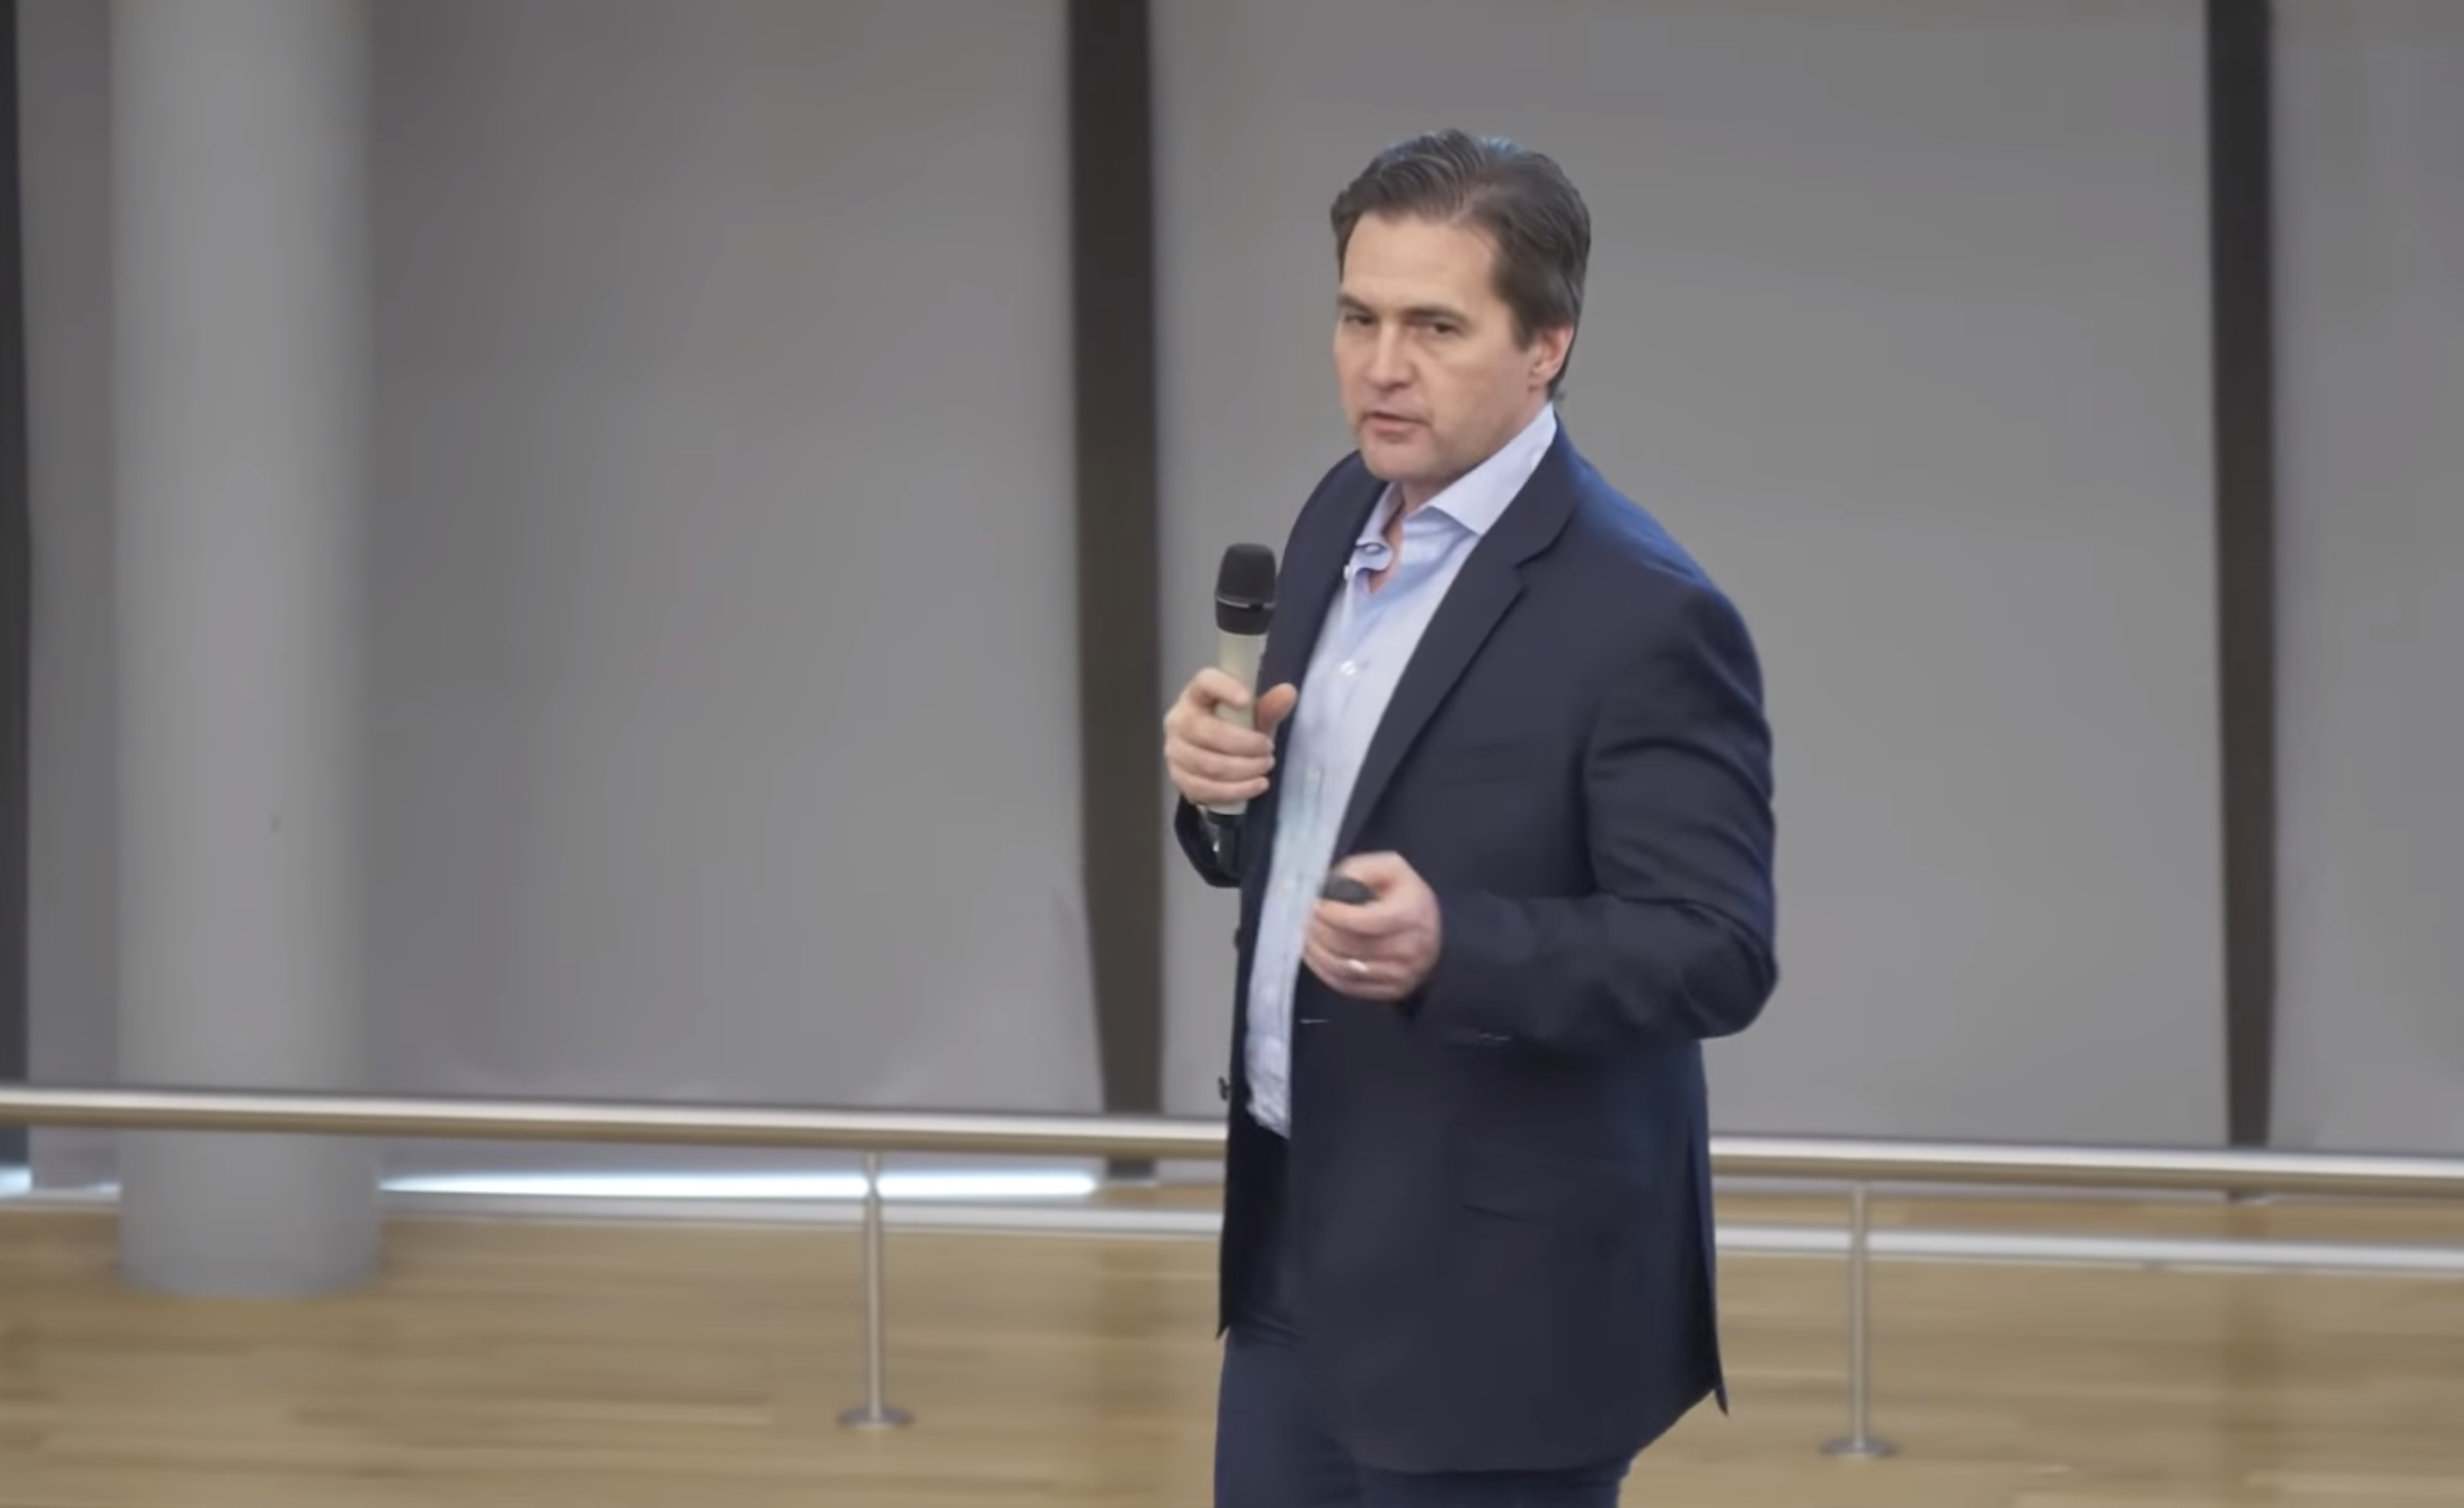 Craig-wright-called-‘fraud’-in-message-signed-with-bitcoin-addresses-he-claims-to-own